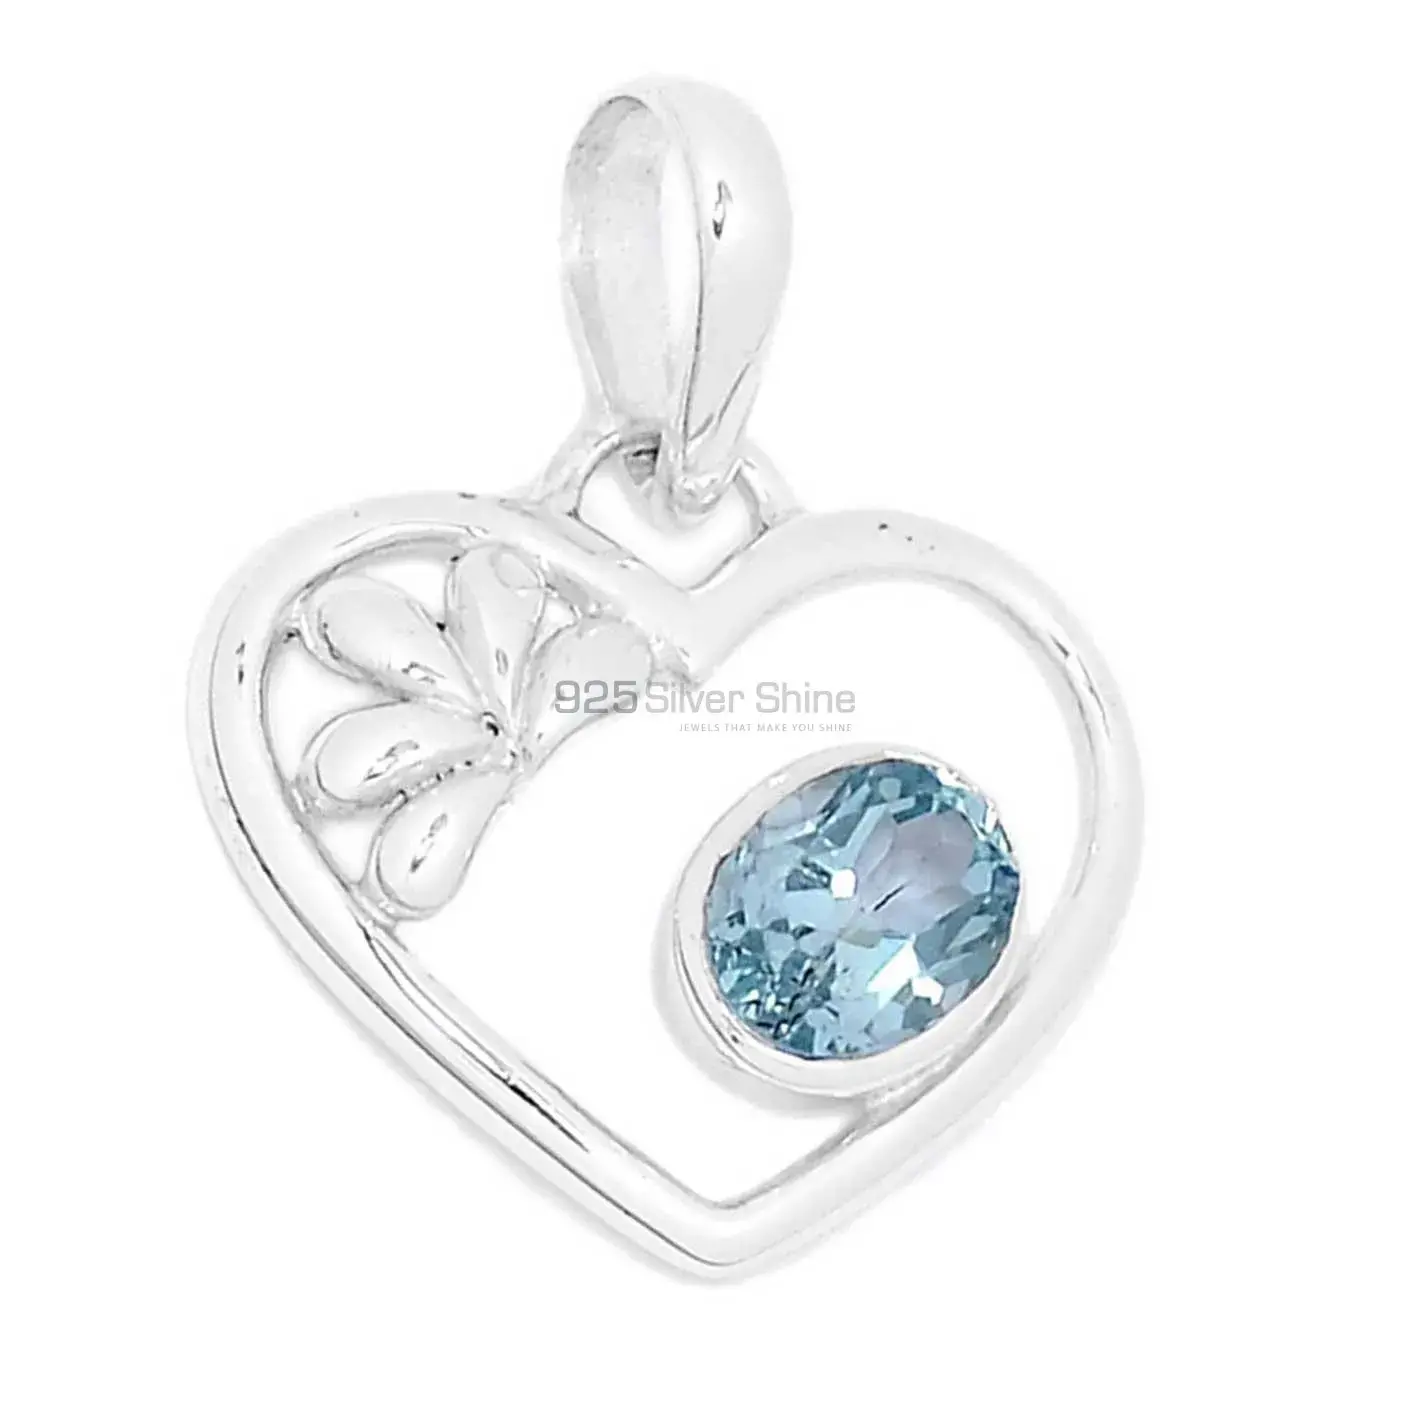 High Quality 925 Solid Silver Pendants Exporters In Blue Topaz Gemstone Jewelry 925SP278-3_0